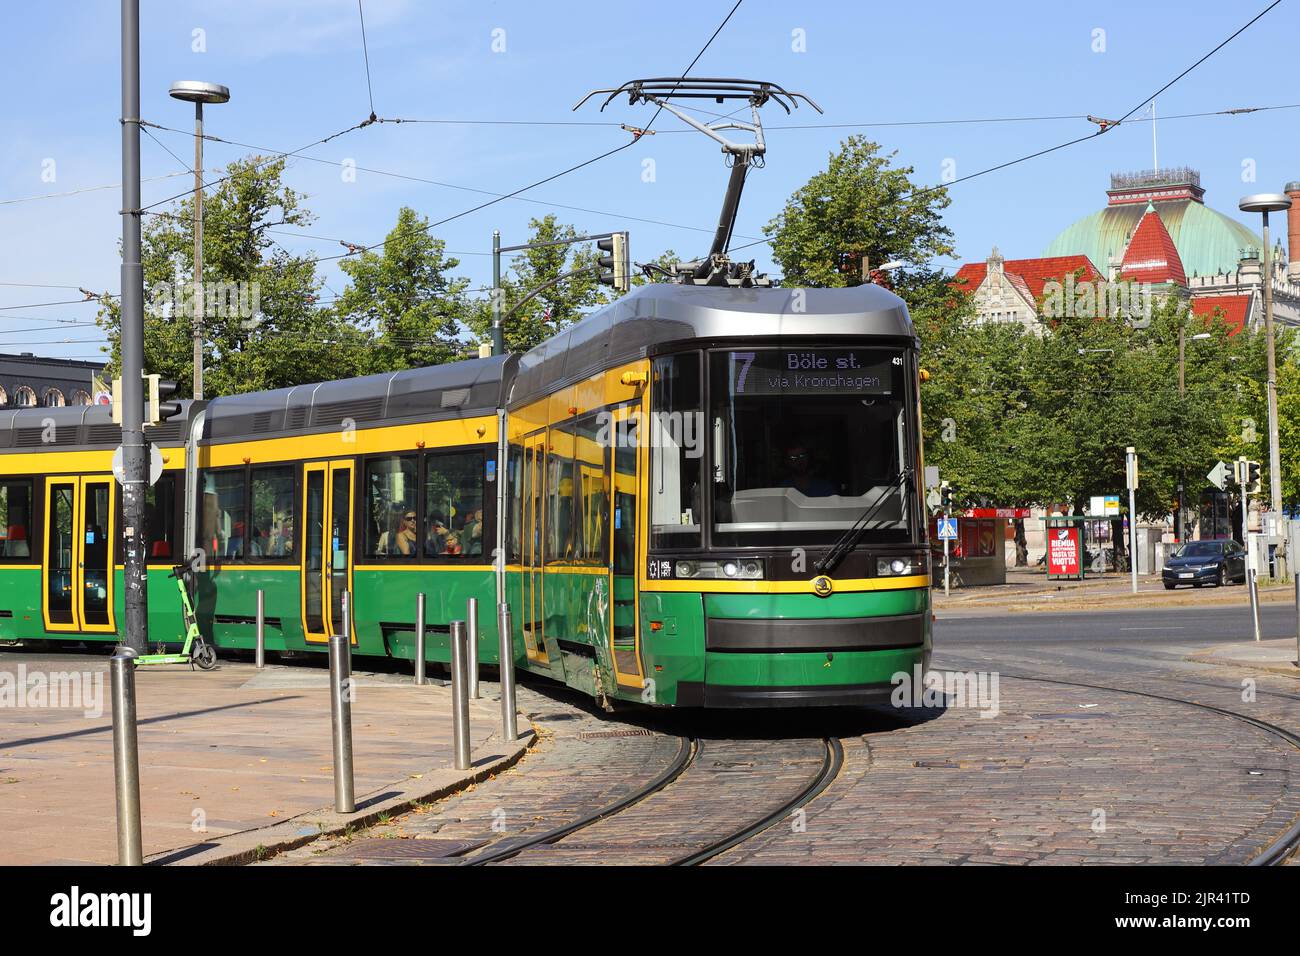 Helsinki, Finland - August 20, 2022: Articulated low-floor class MLNRV III Artic modern tram in service on line 7 at the Central railroad station area Stock Photo